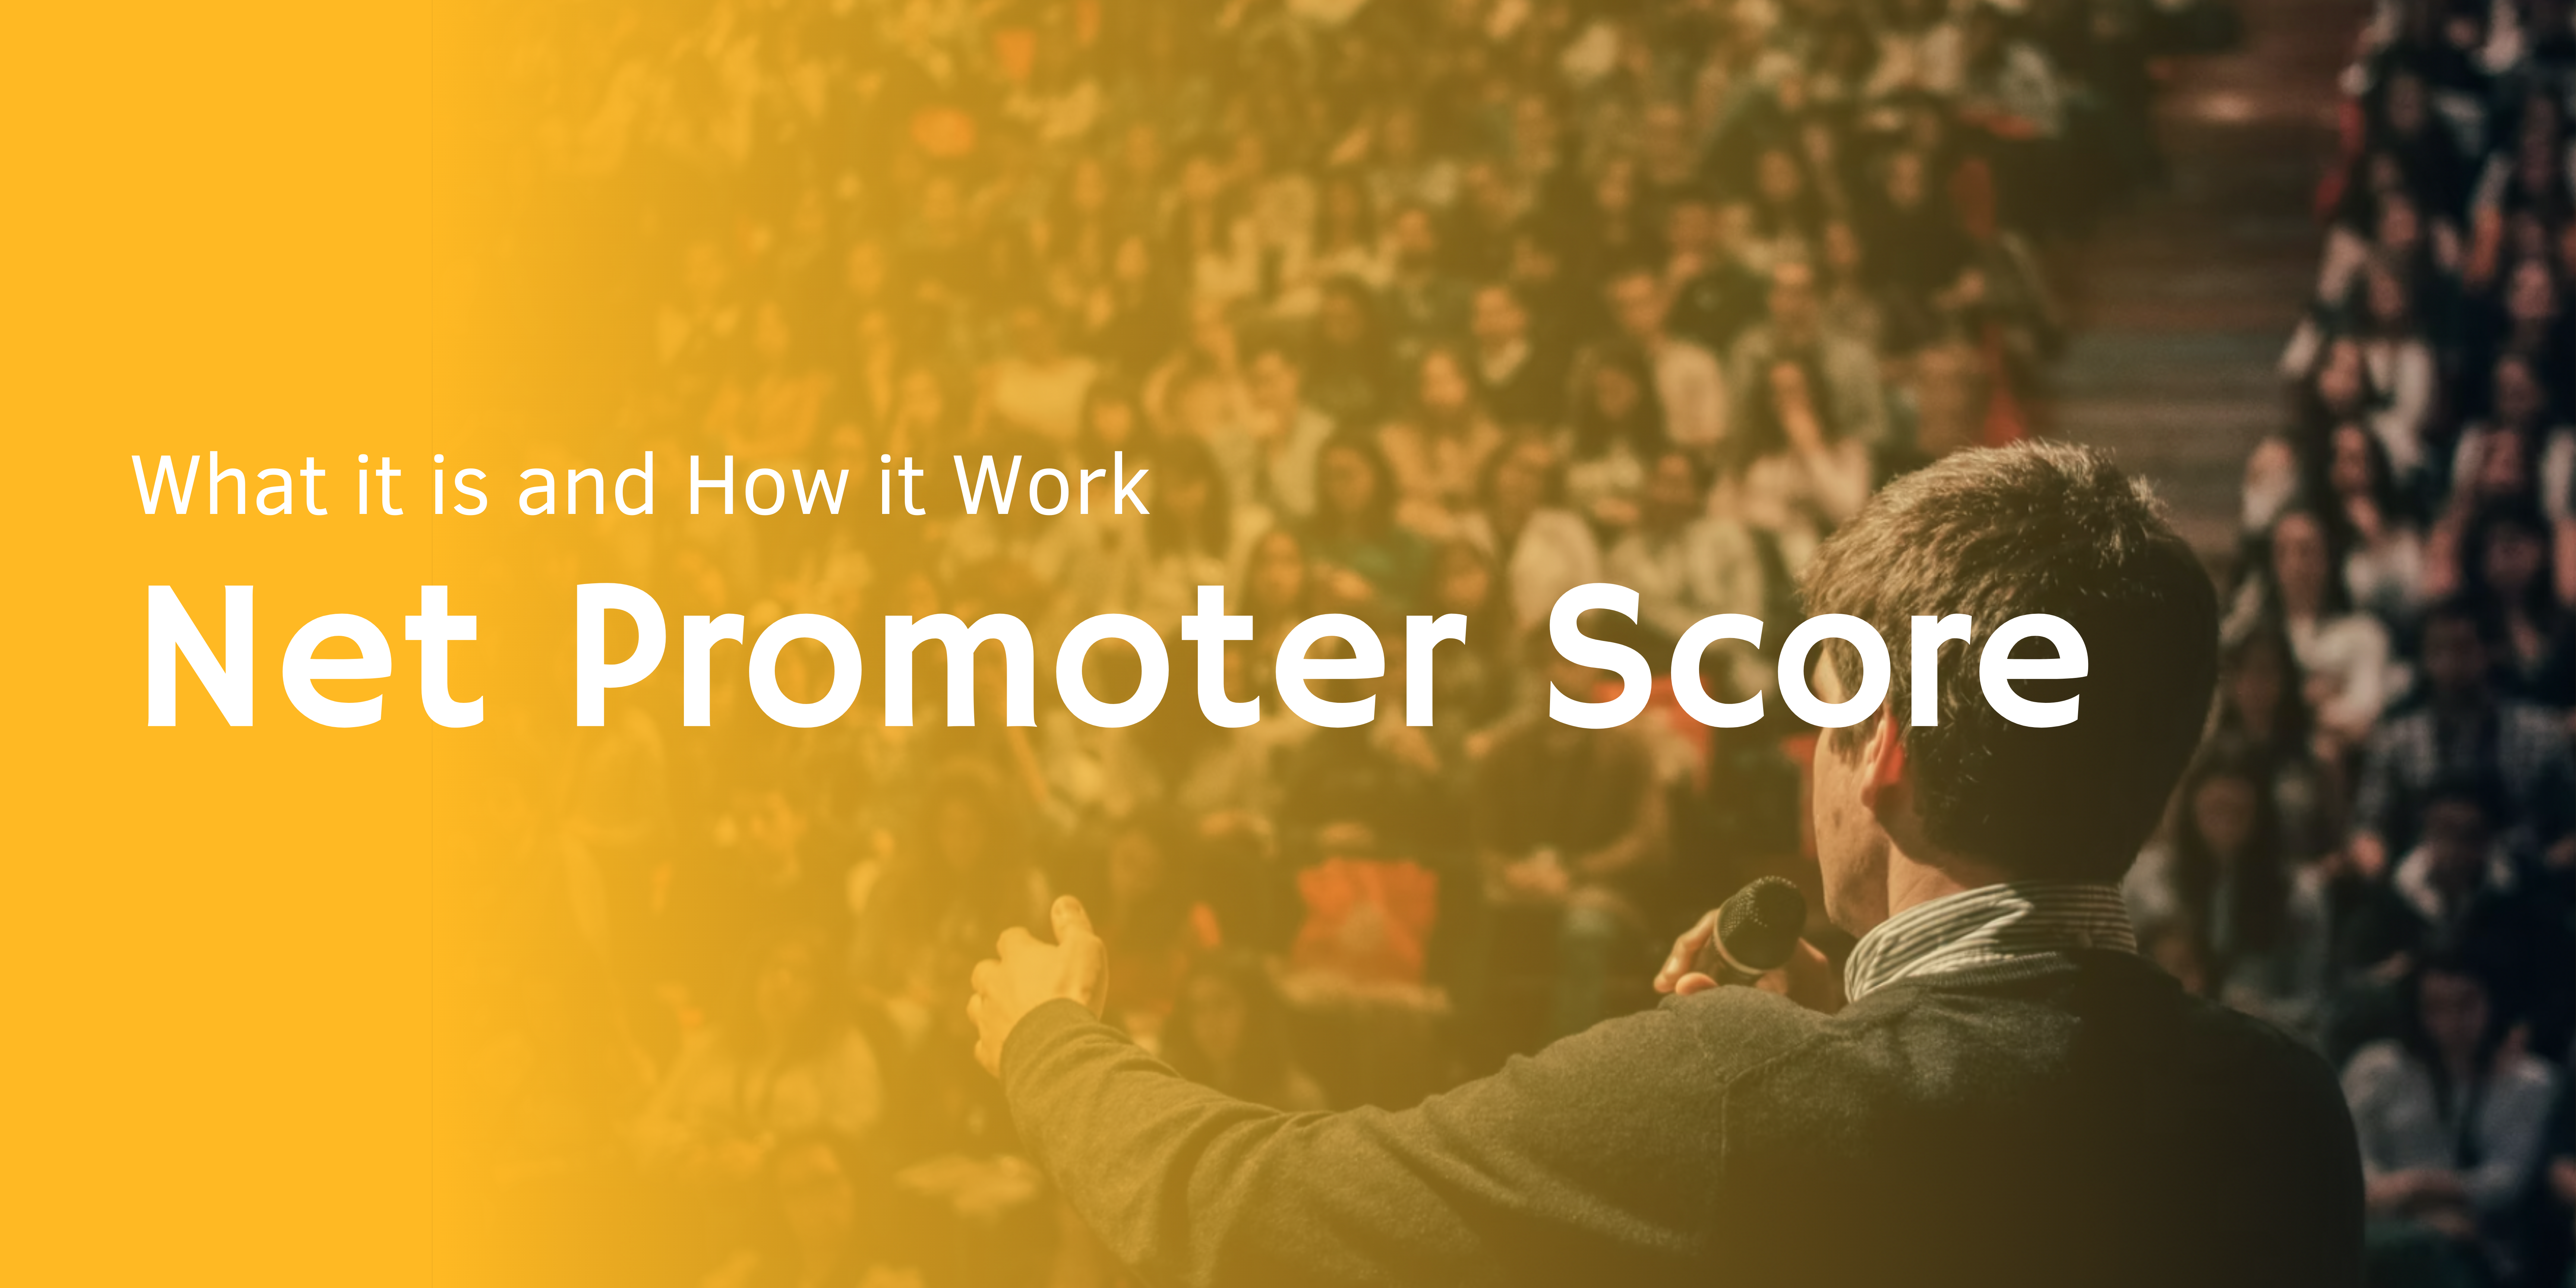 Net Promoter Score - What it is and How it Work